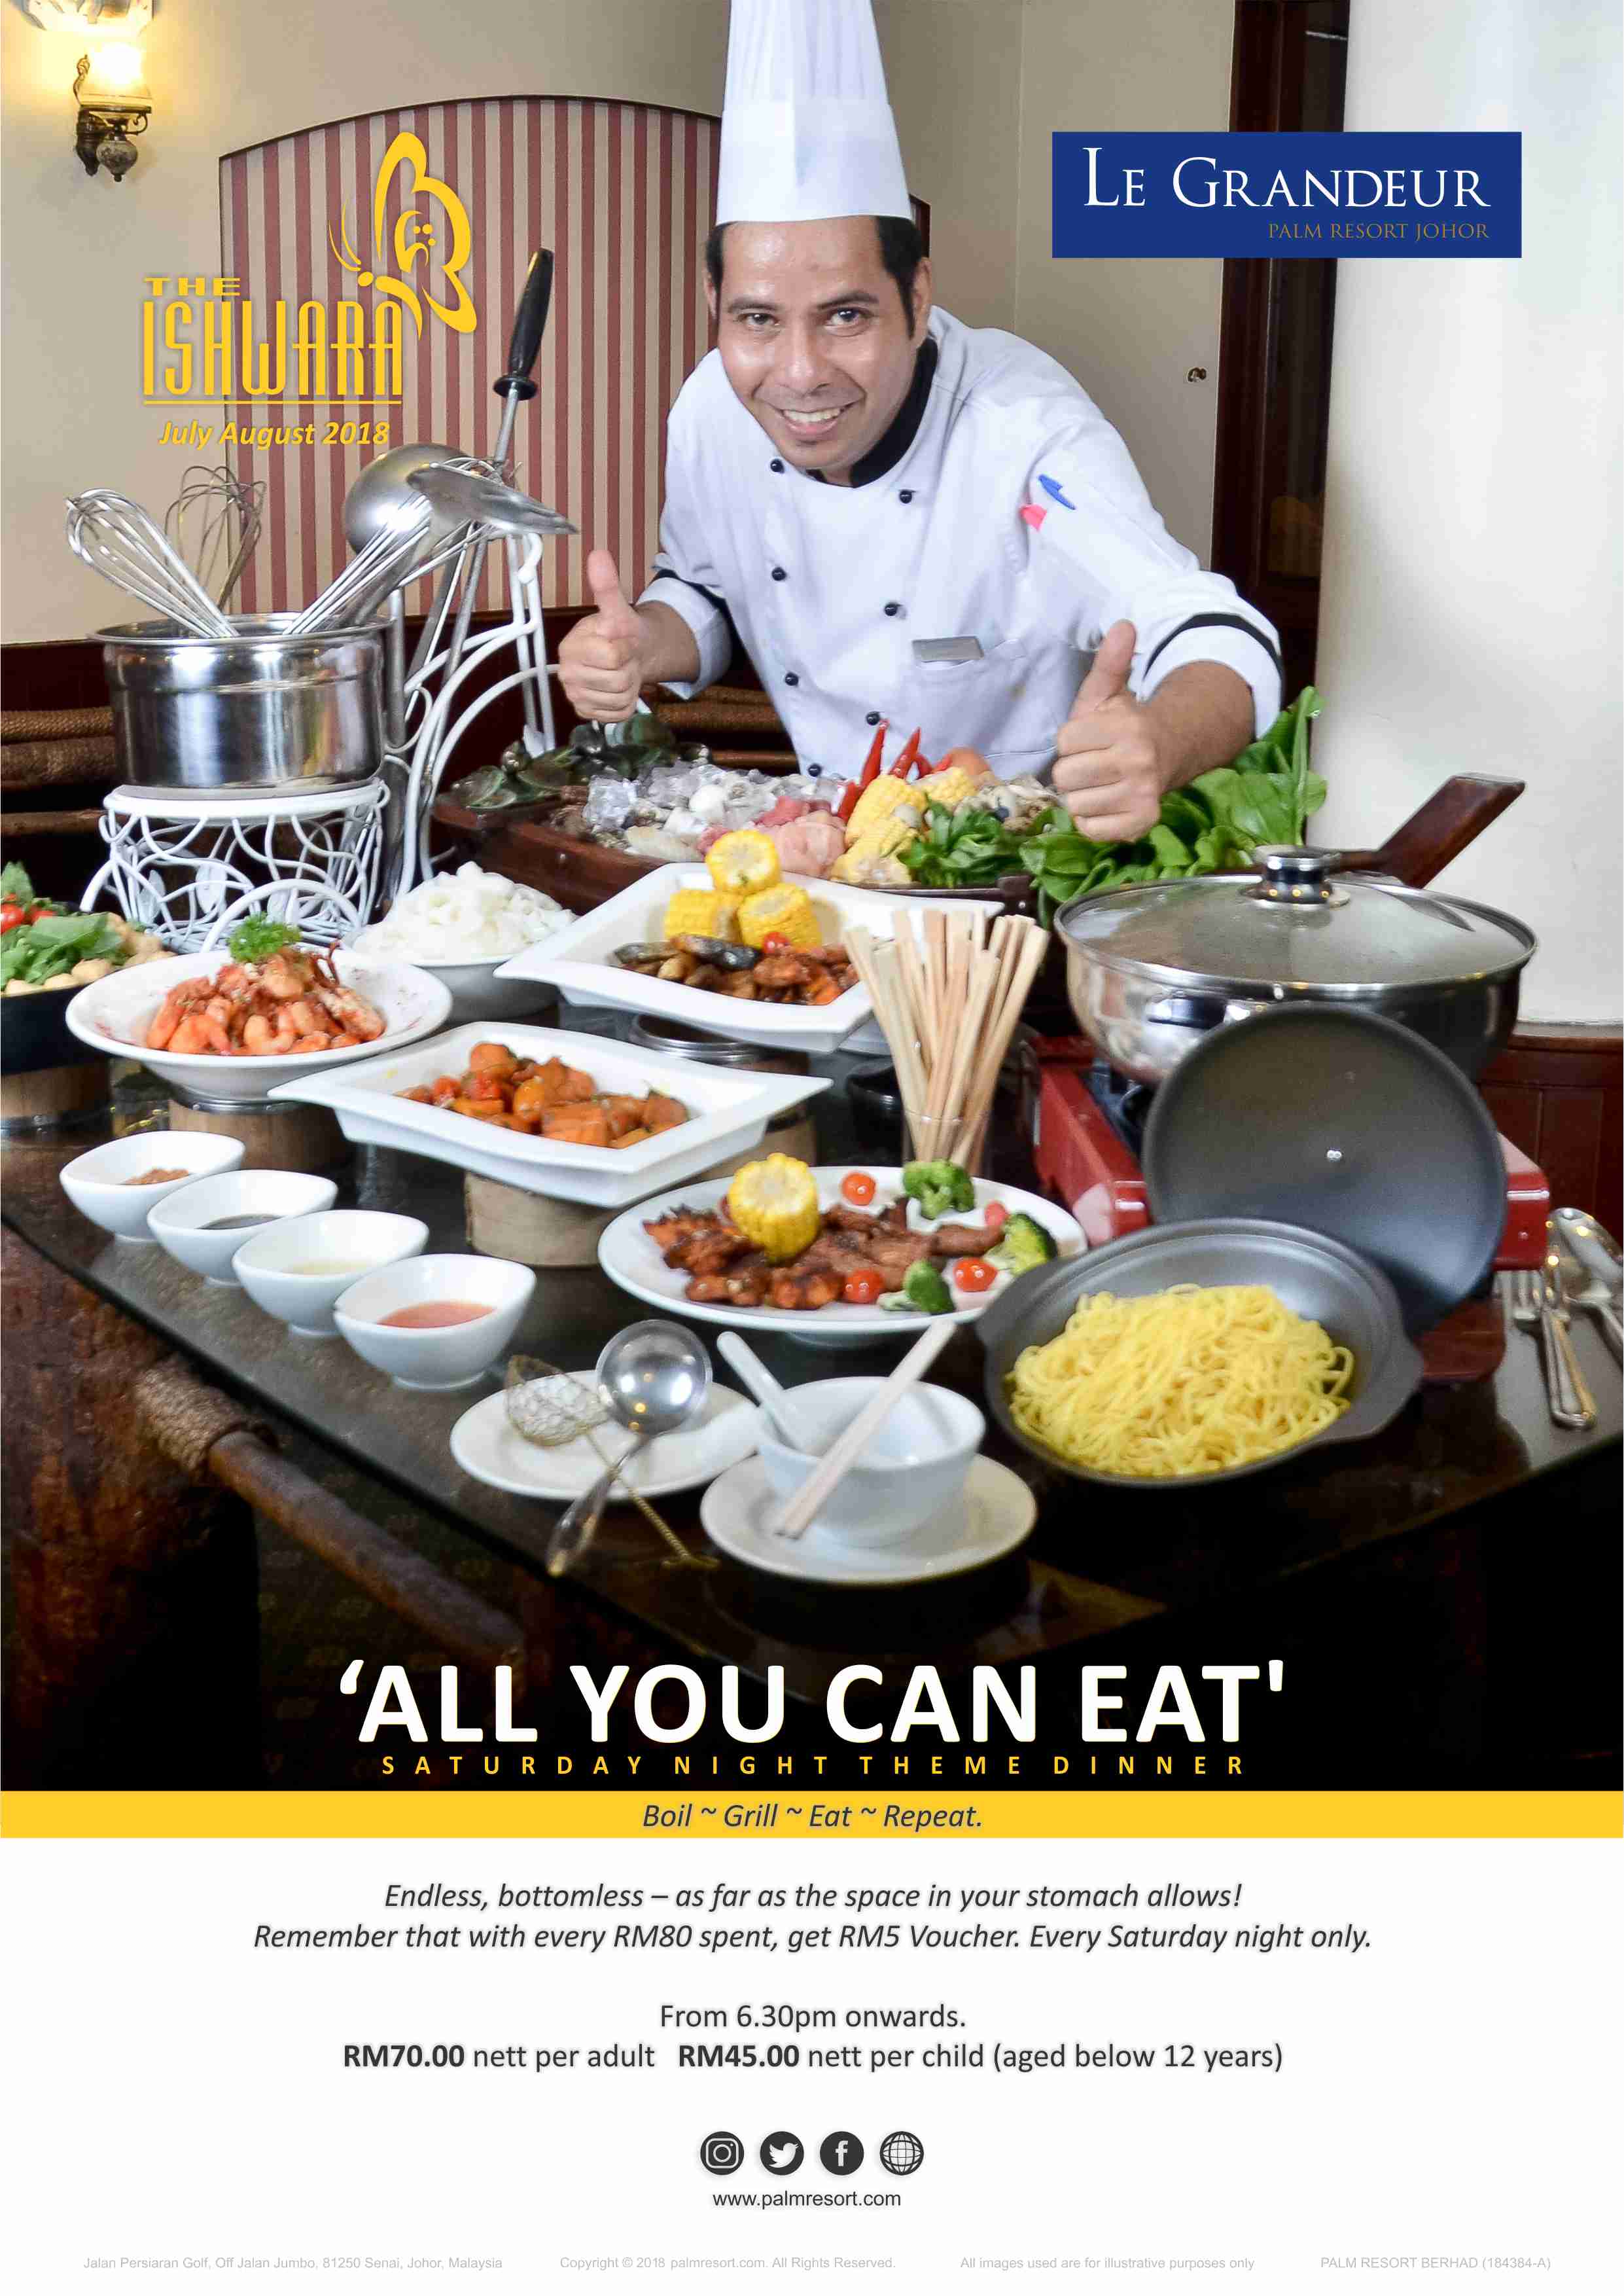 'ALL YOU CAN EAT' SATURDAY NIGHT THEME DINNER | Palm Resort